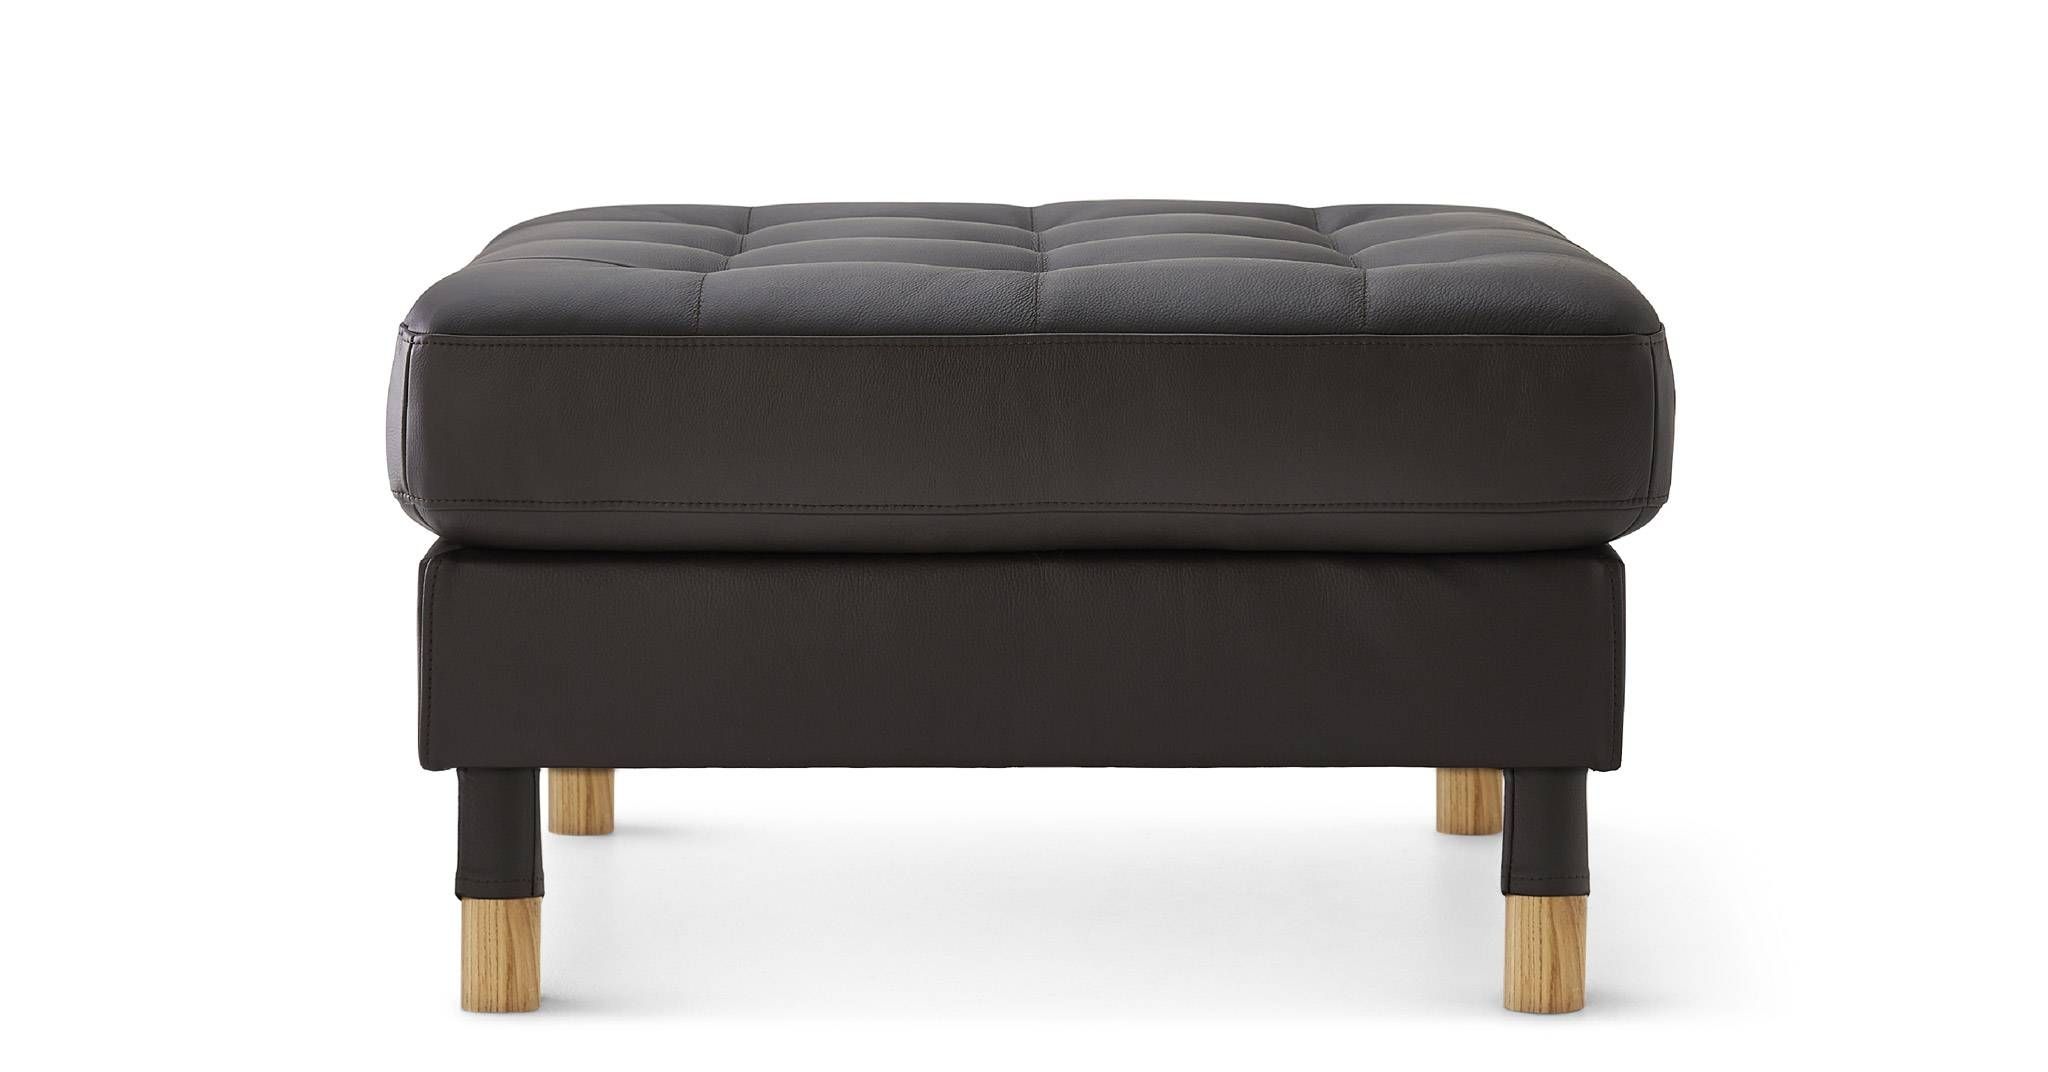 Leather Footstools & Pouffes | Ikea Ireland With Regard To Footstools And Pouffes (View 15 of 30)